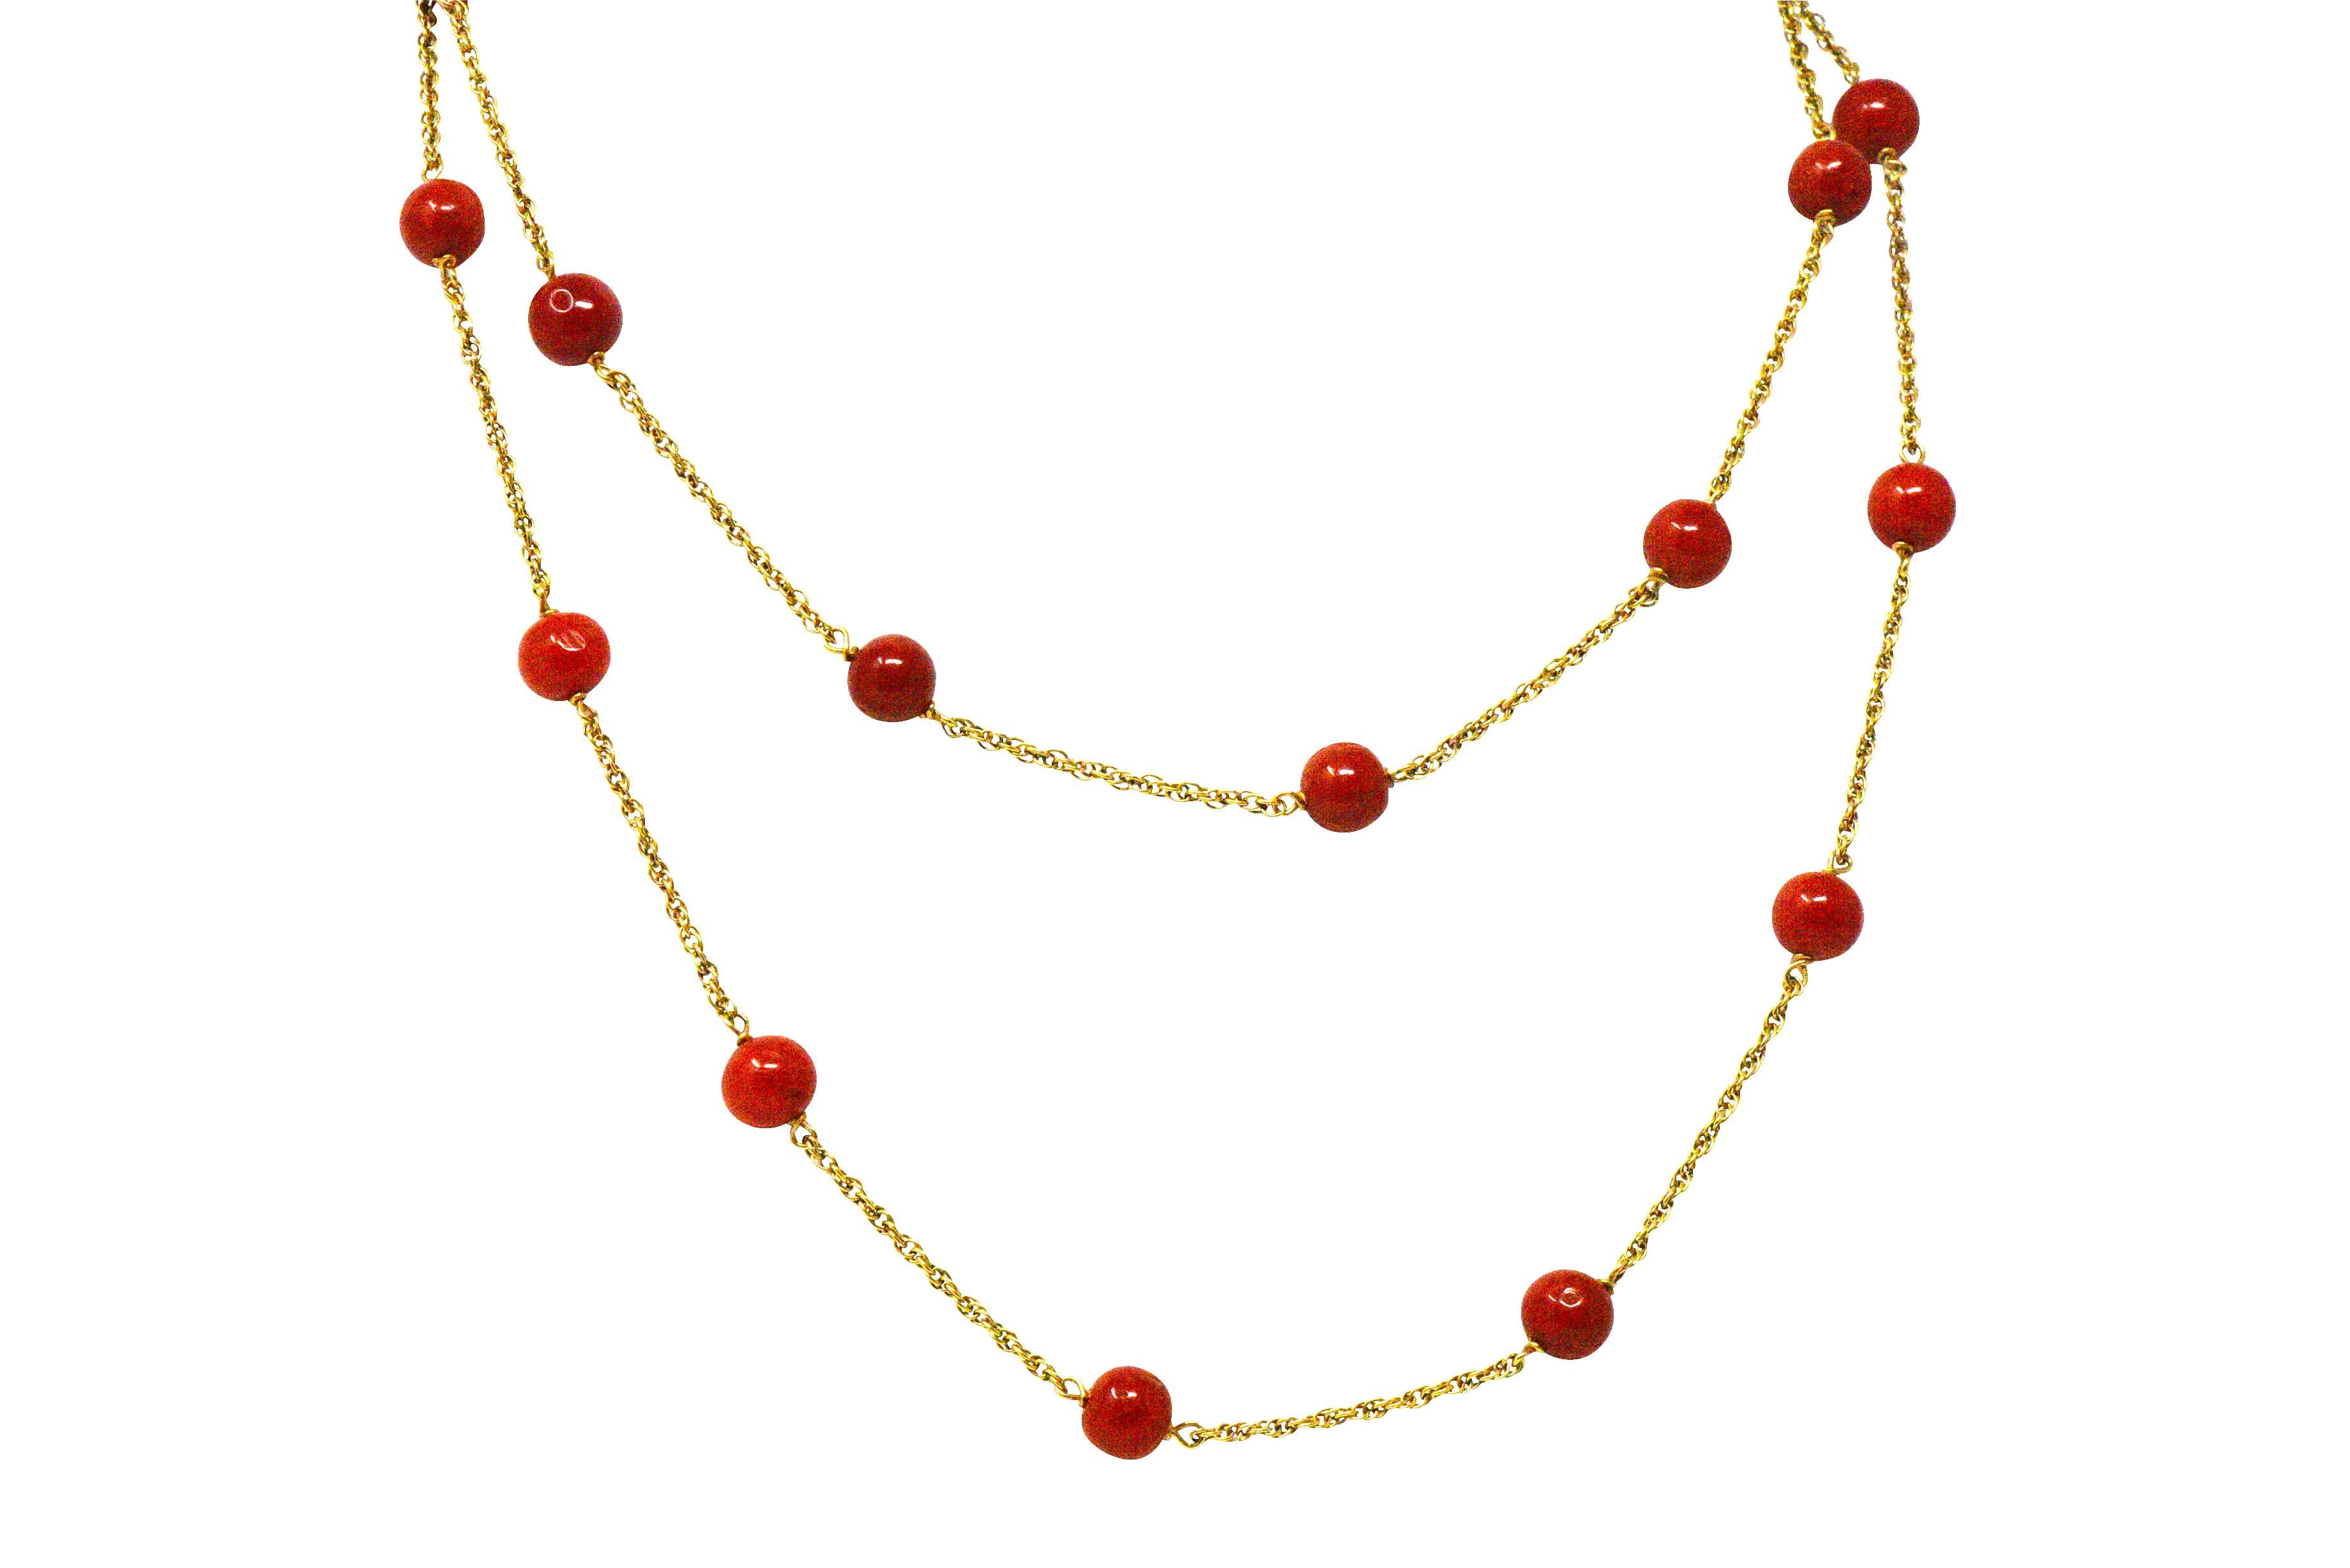 Featuring 23 near-round coral beads, measuring approximately 7.0 mm, deep reddish orange and very well matched

Twisted rope style chain between the coral beads

Completed by a spring ring clasp

Length: 31 inches

Total Weight: 16.6 Grams

Natural.